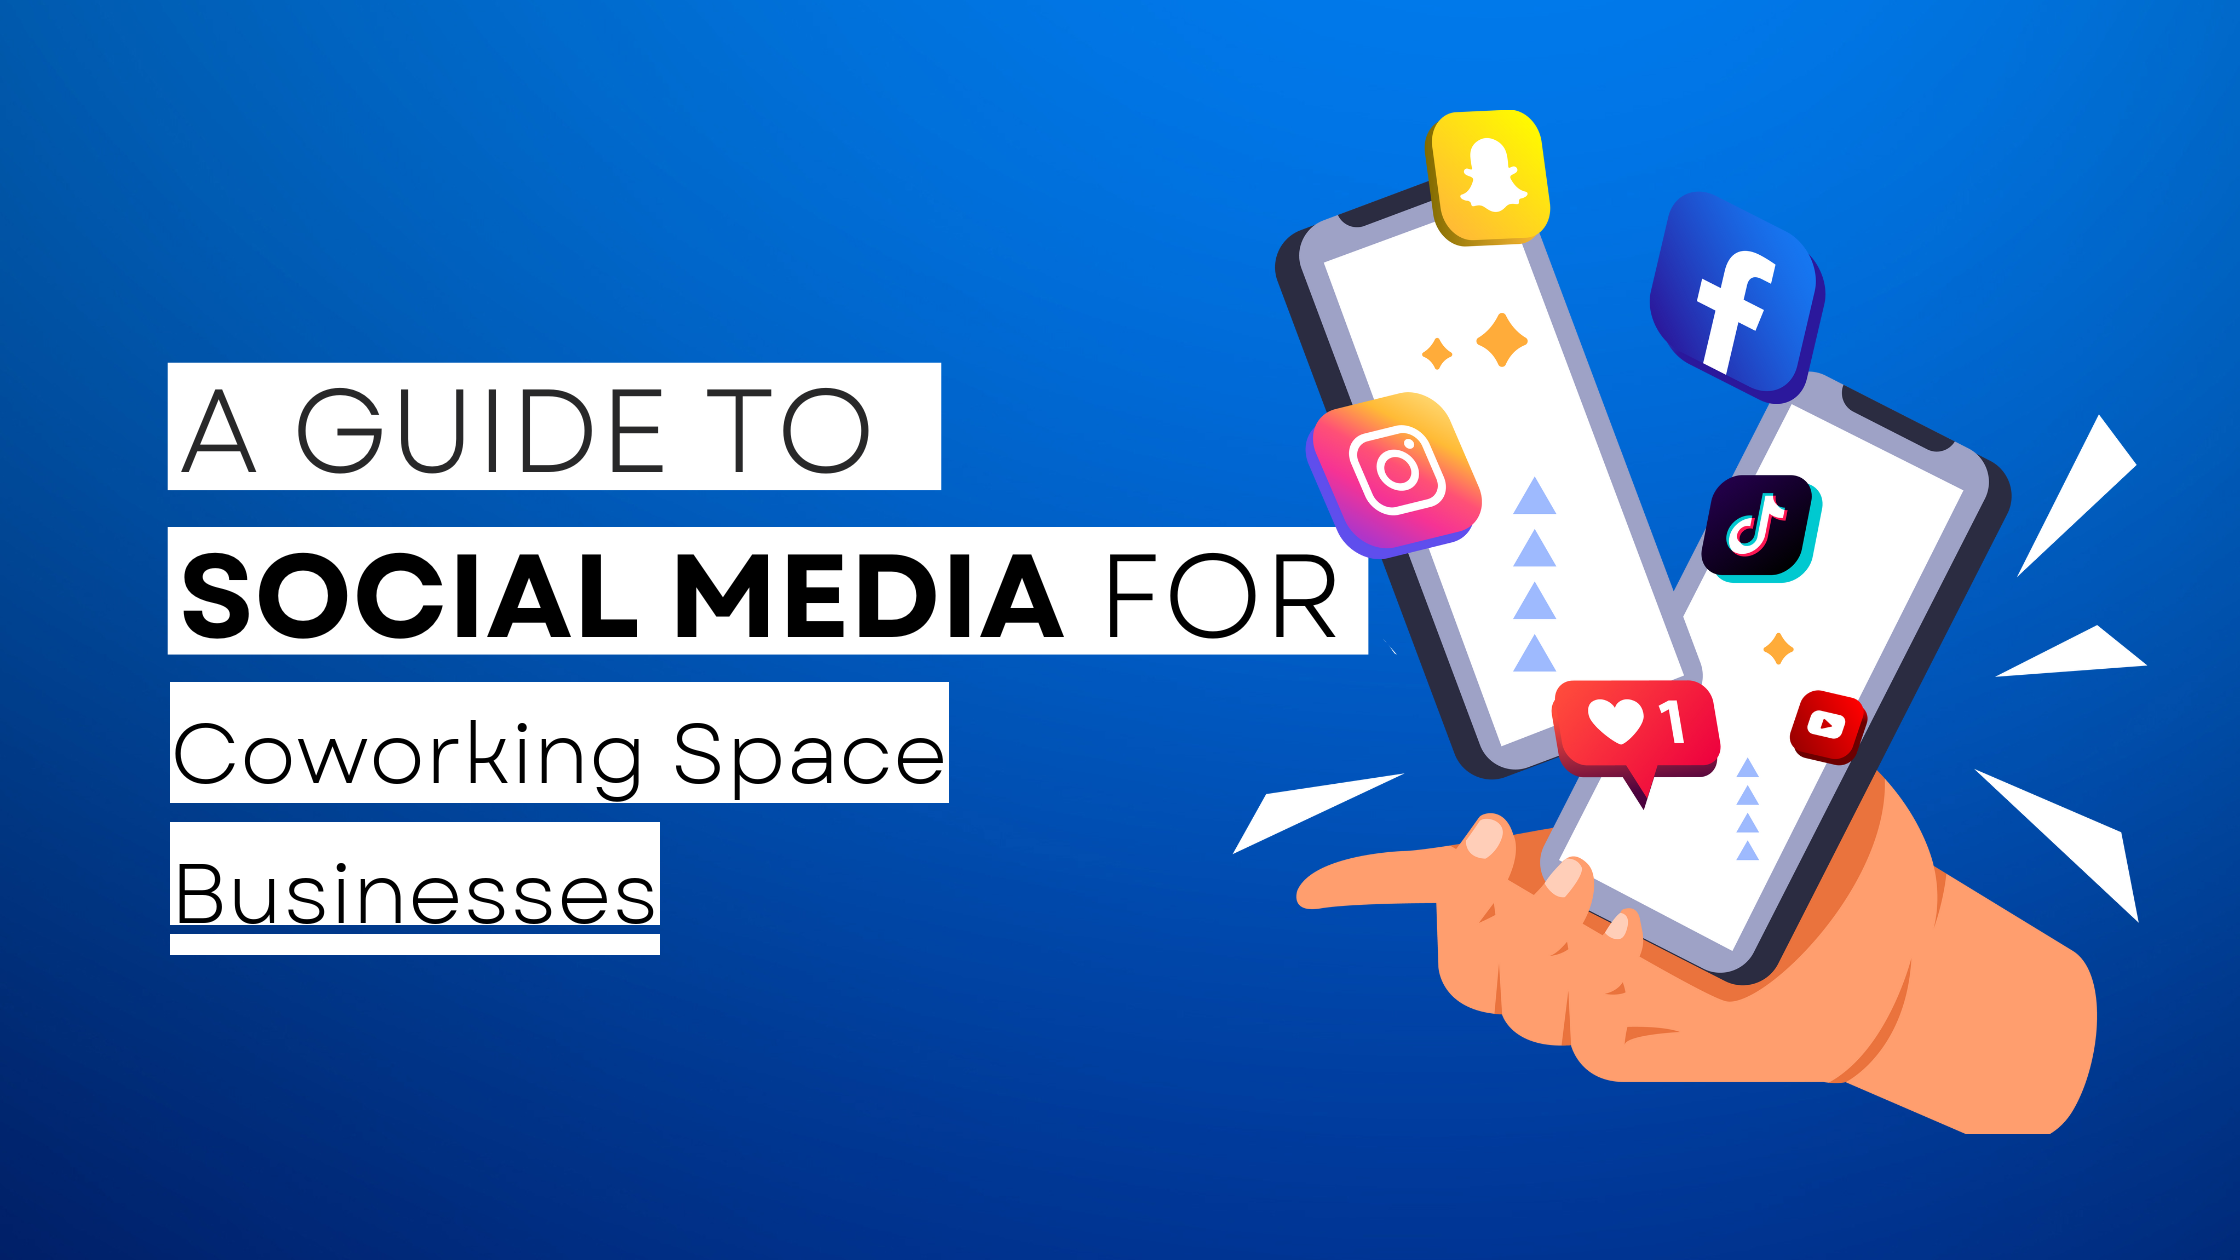 How to start Coworking Space on social media